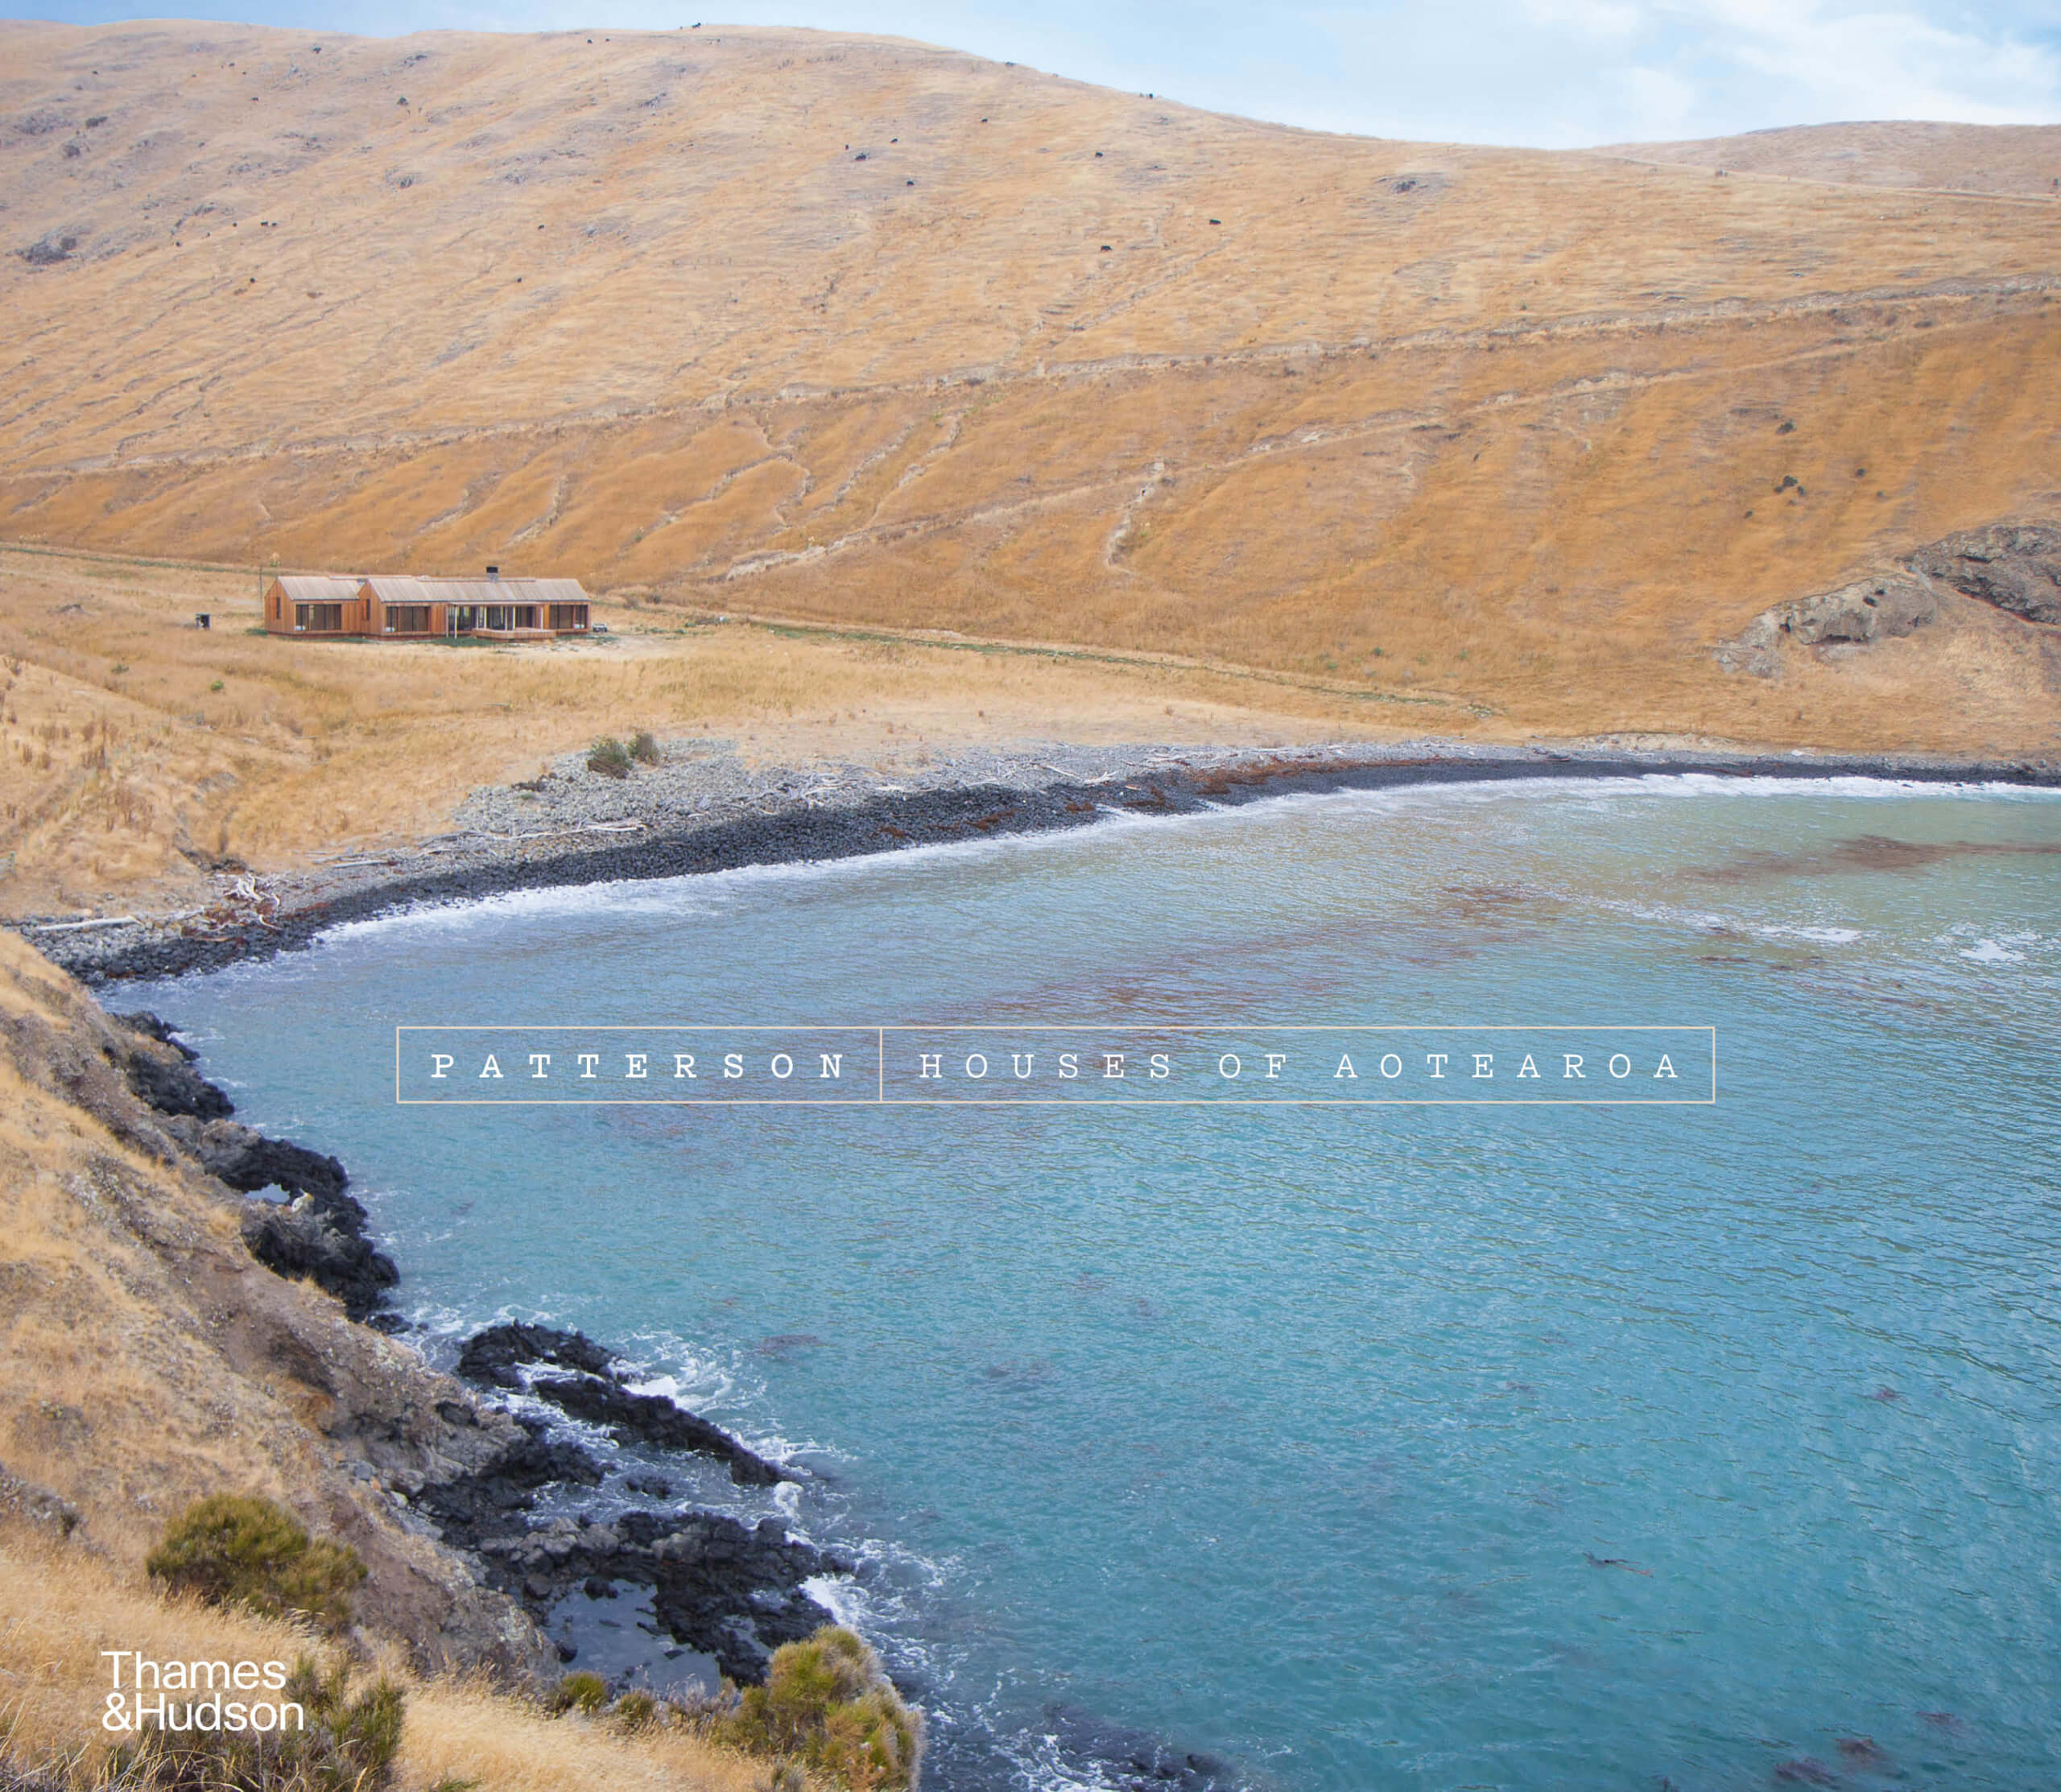 Book cover featuring photograph of small structure nestled in expansive NZ bay. Title in small sans serif white font in middle